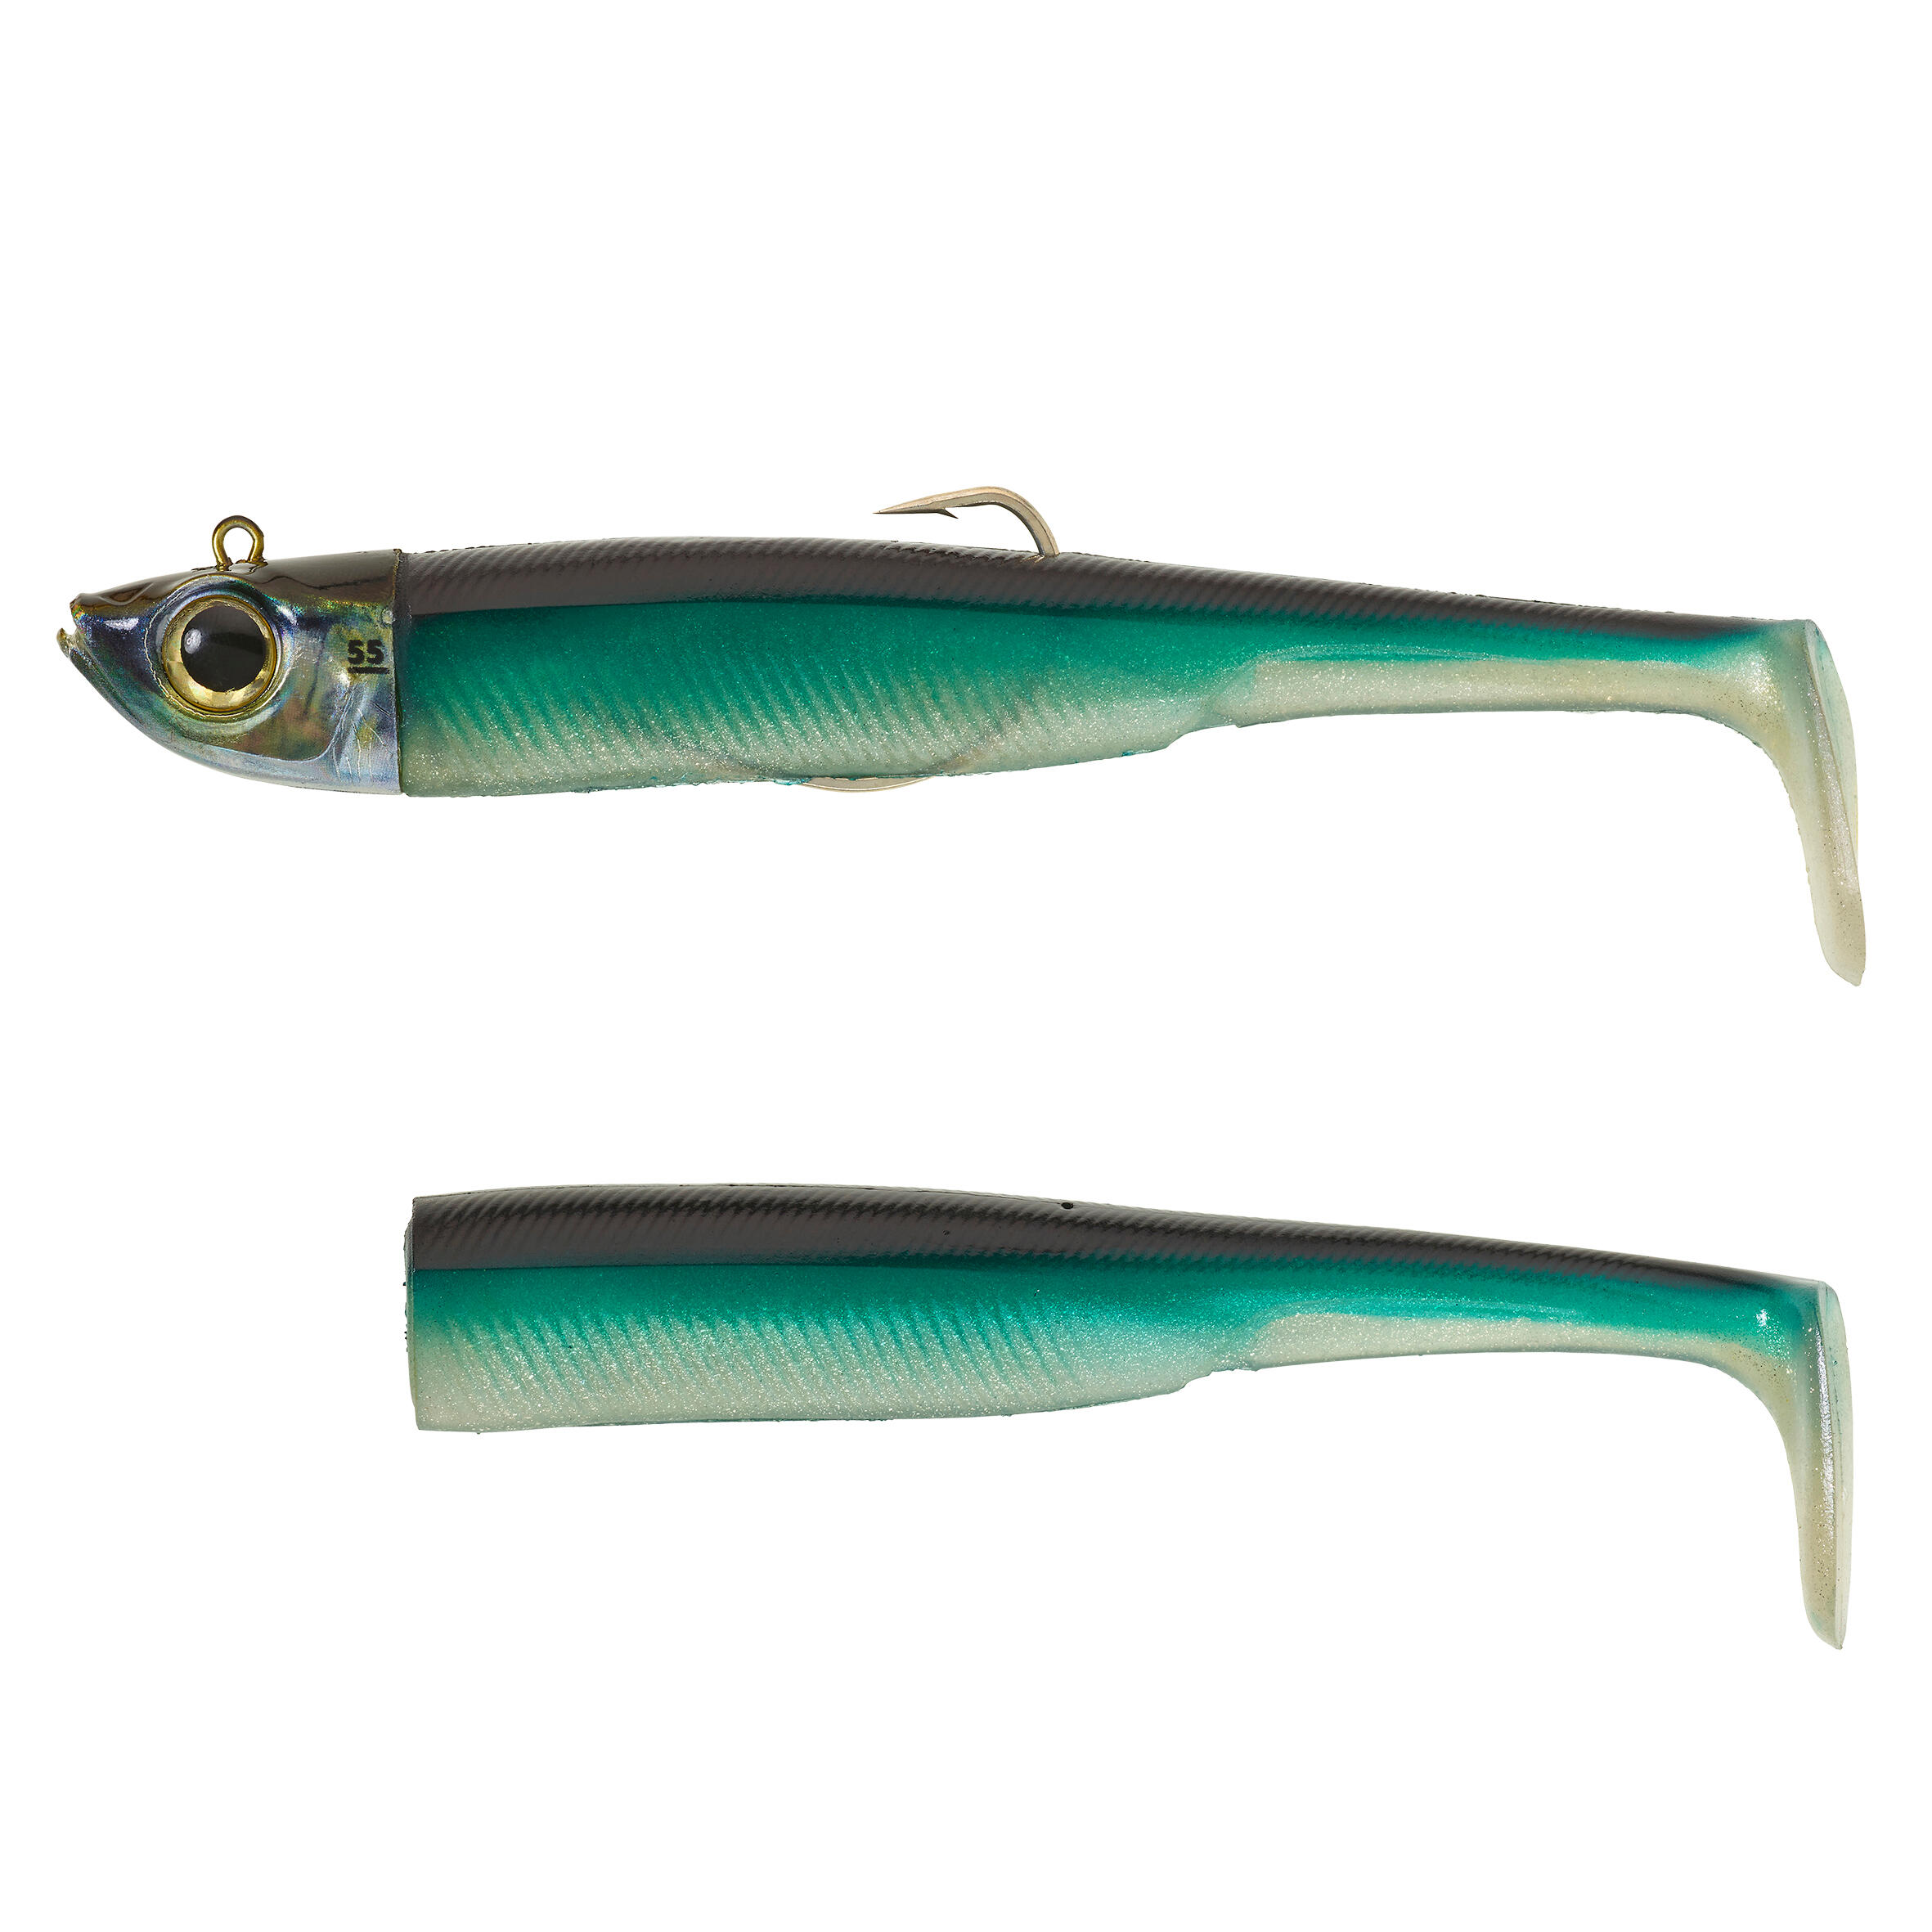 CAPERLAN Sea fishing supple lures Texas anchovy shad KIT ANCHO 150 55 g - Blue